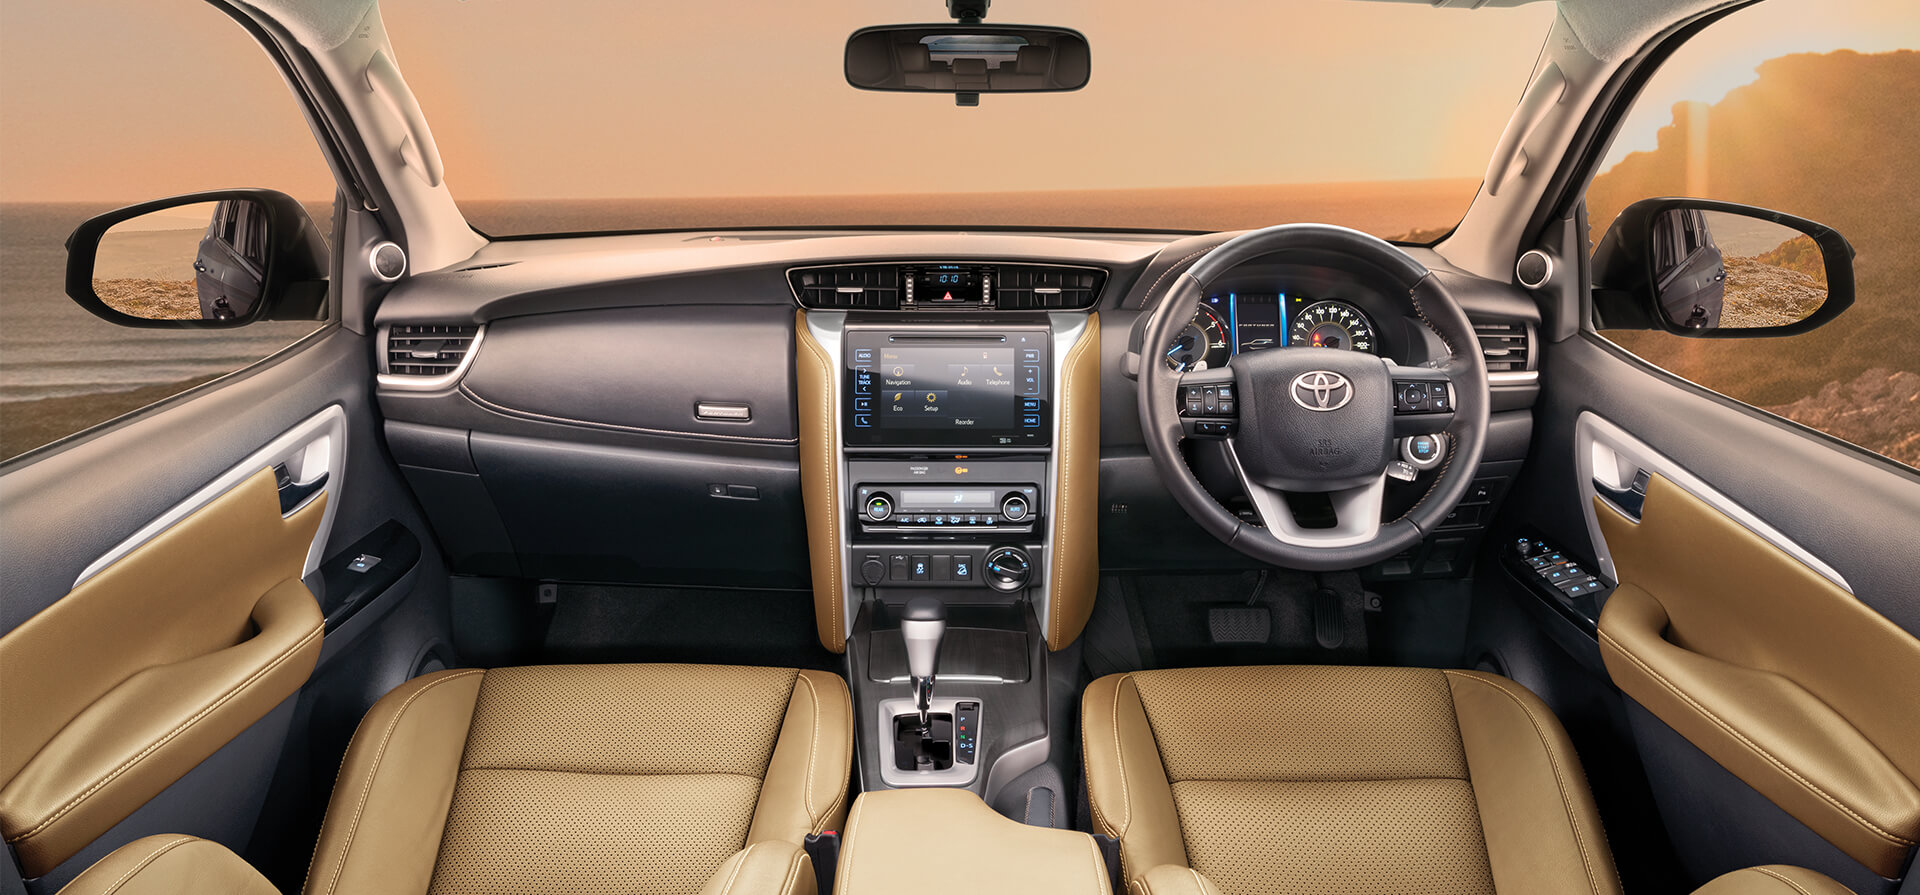 Introducing Chamois Colour Interiors - Fortuner Top Model Interior , HD Wallpaper & Backgrounds